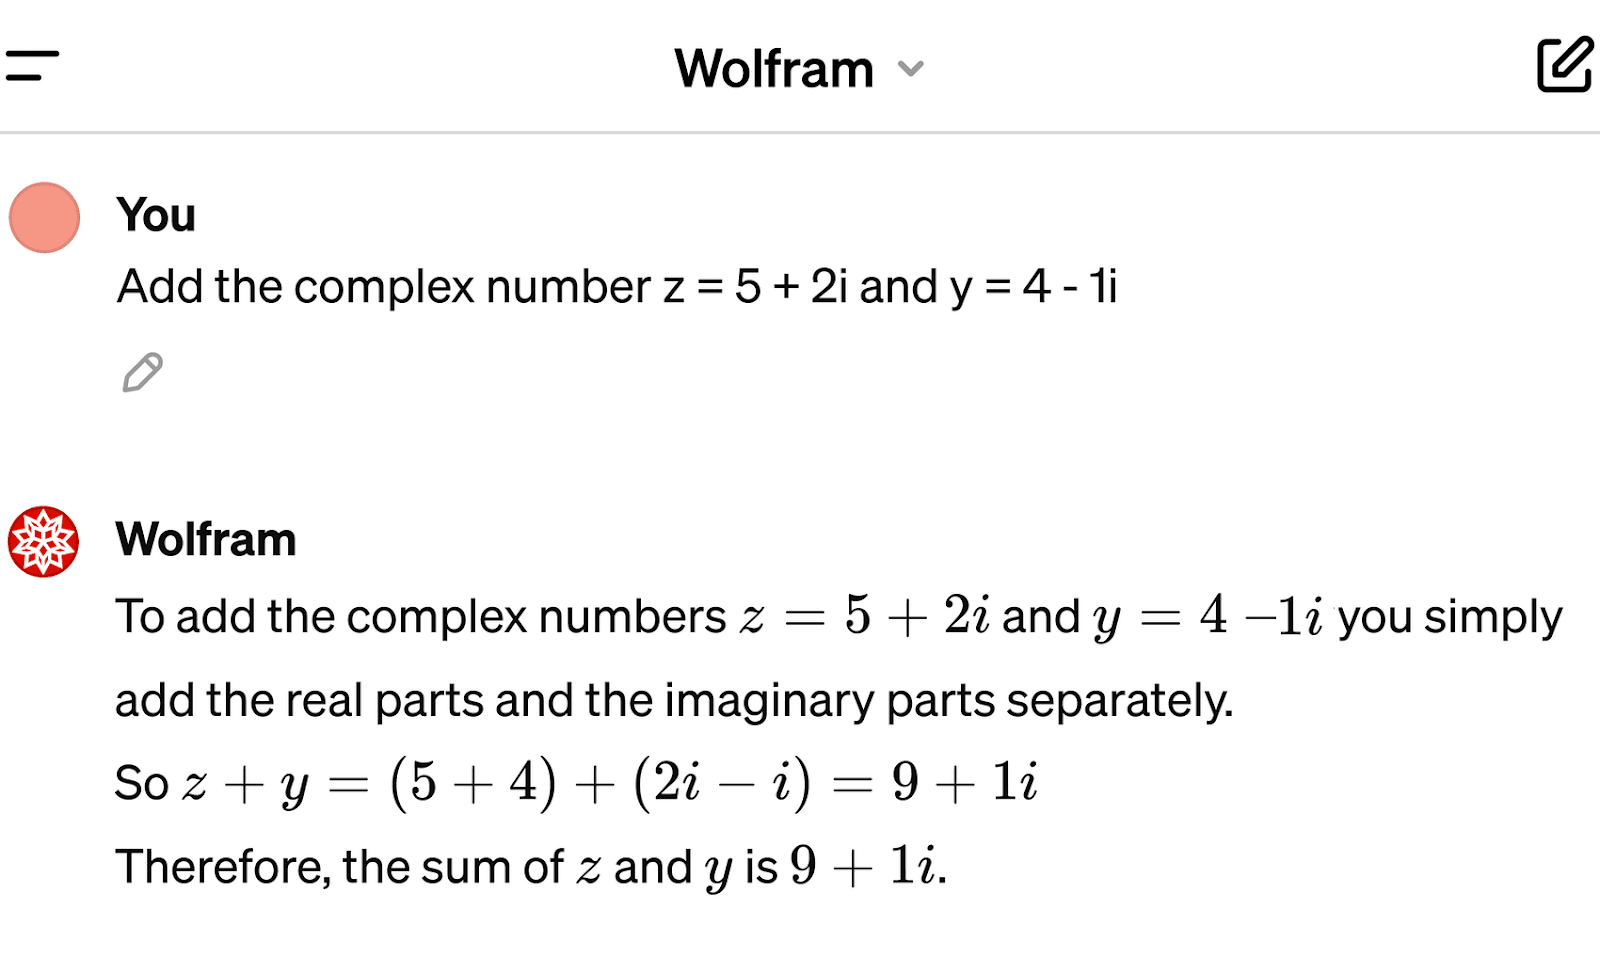 Wolfram answering mathematical question